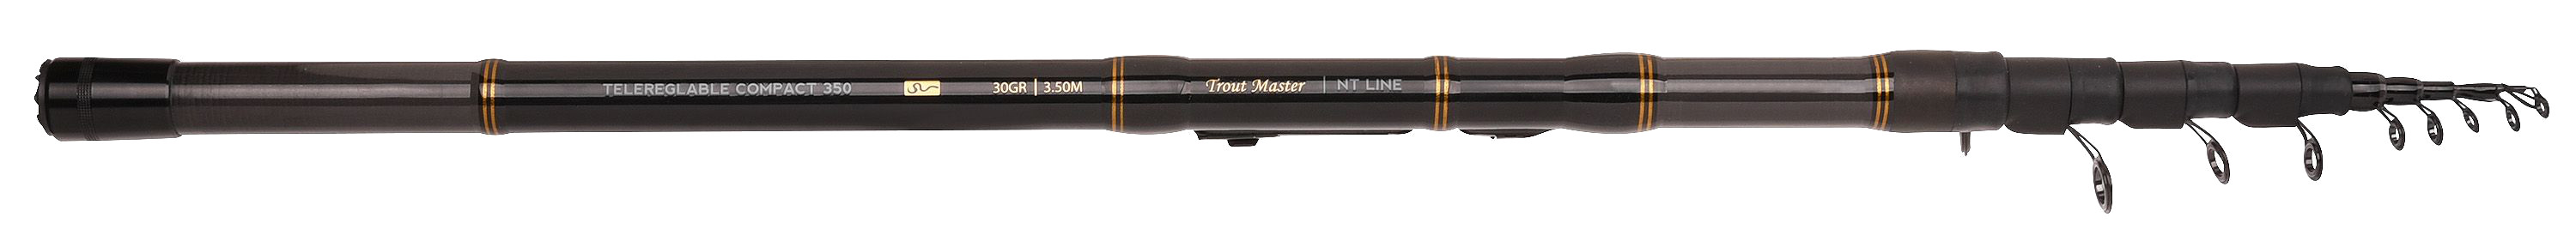 Spro Trout Master Telereglable Compact Telescopic Trout Rod